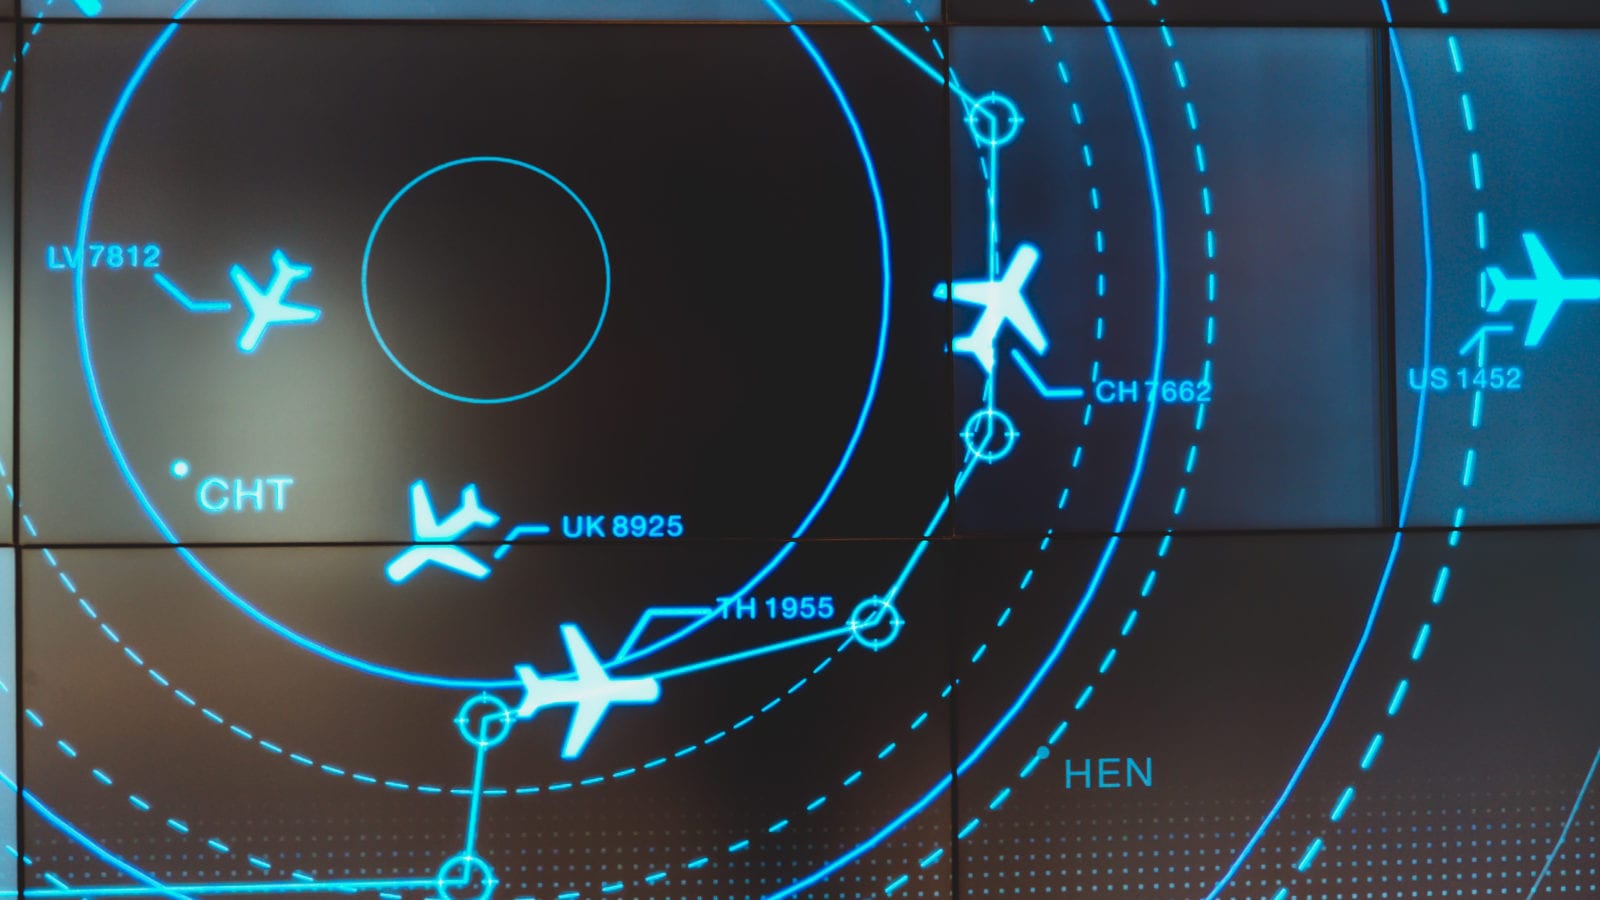 Simulation Screen Showing Various Flights For Transportation And Passengers.